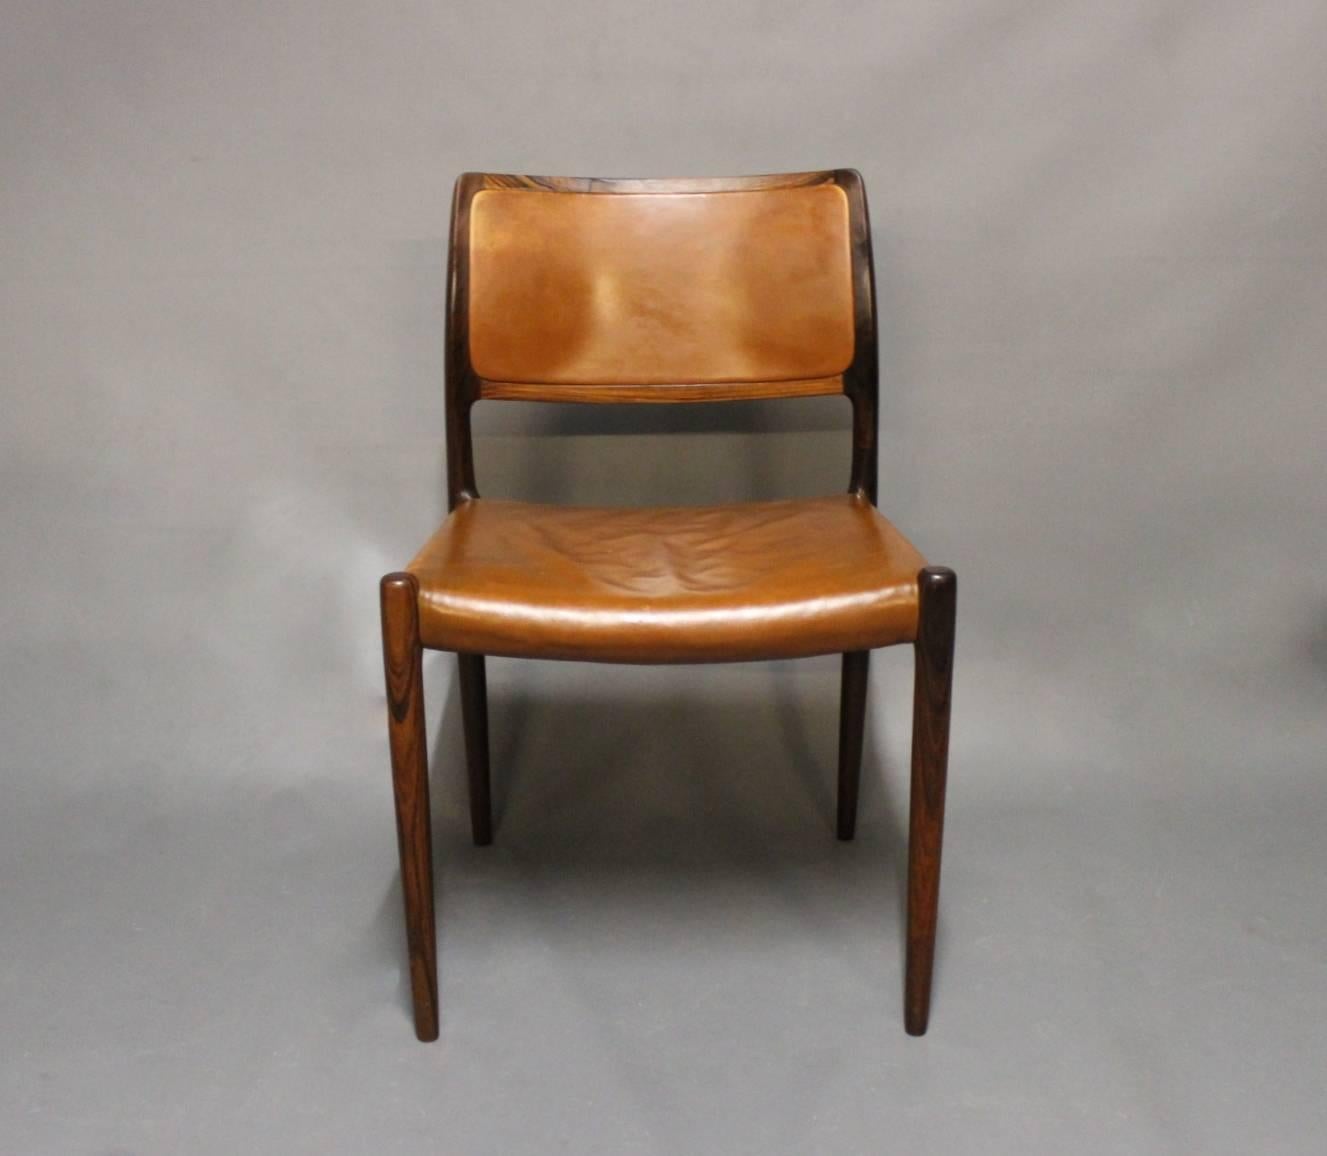 Set of four dining chairs, model 80 in rosewood and cognac colored leather designed by N.O. Møller and manufactured by J. L. Møller furniture factory in the 1960s.